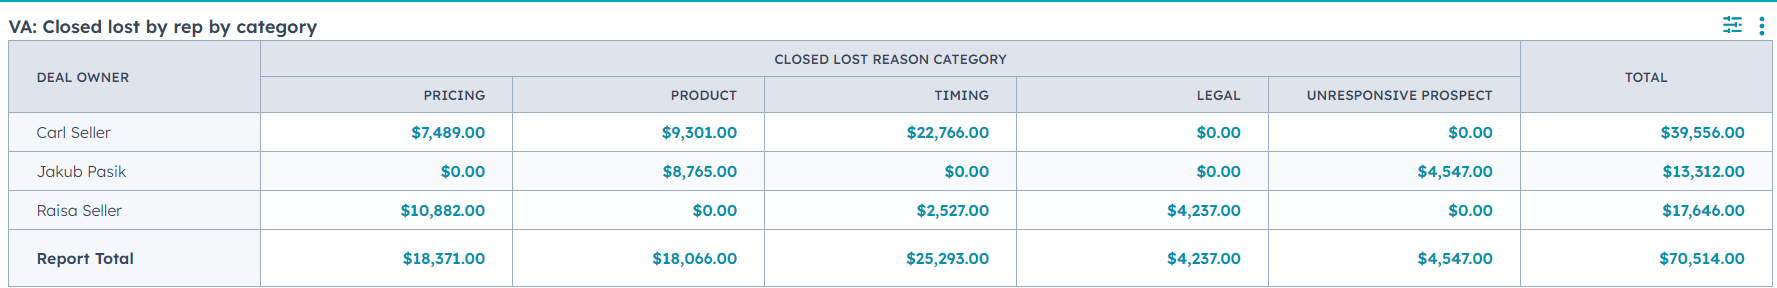 HubSpot Dashboards: Closed lost reason by rep category